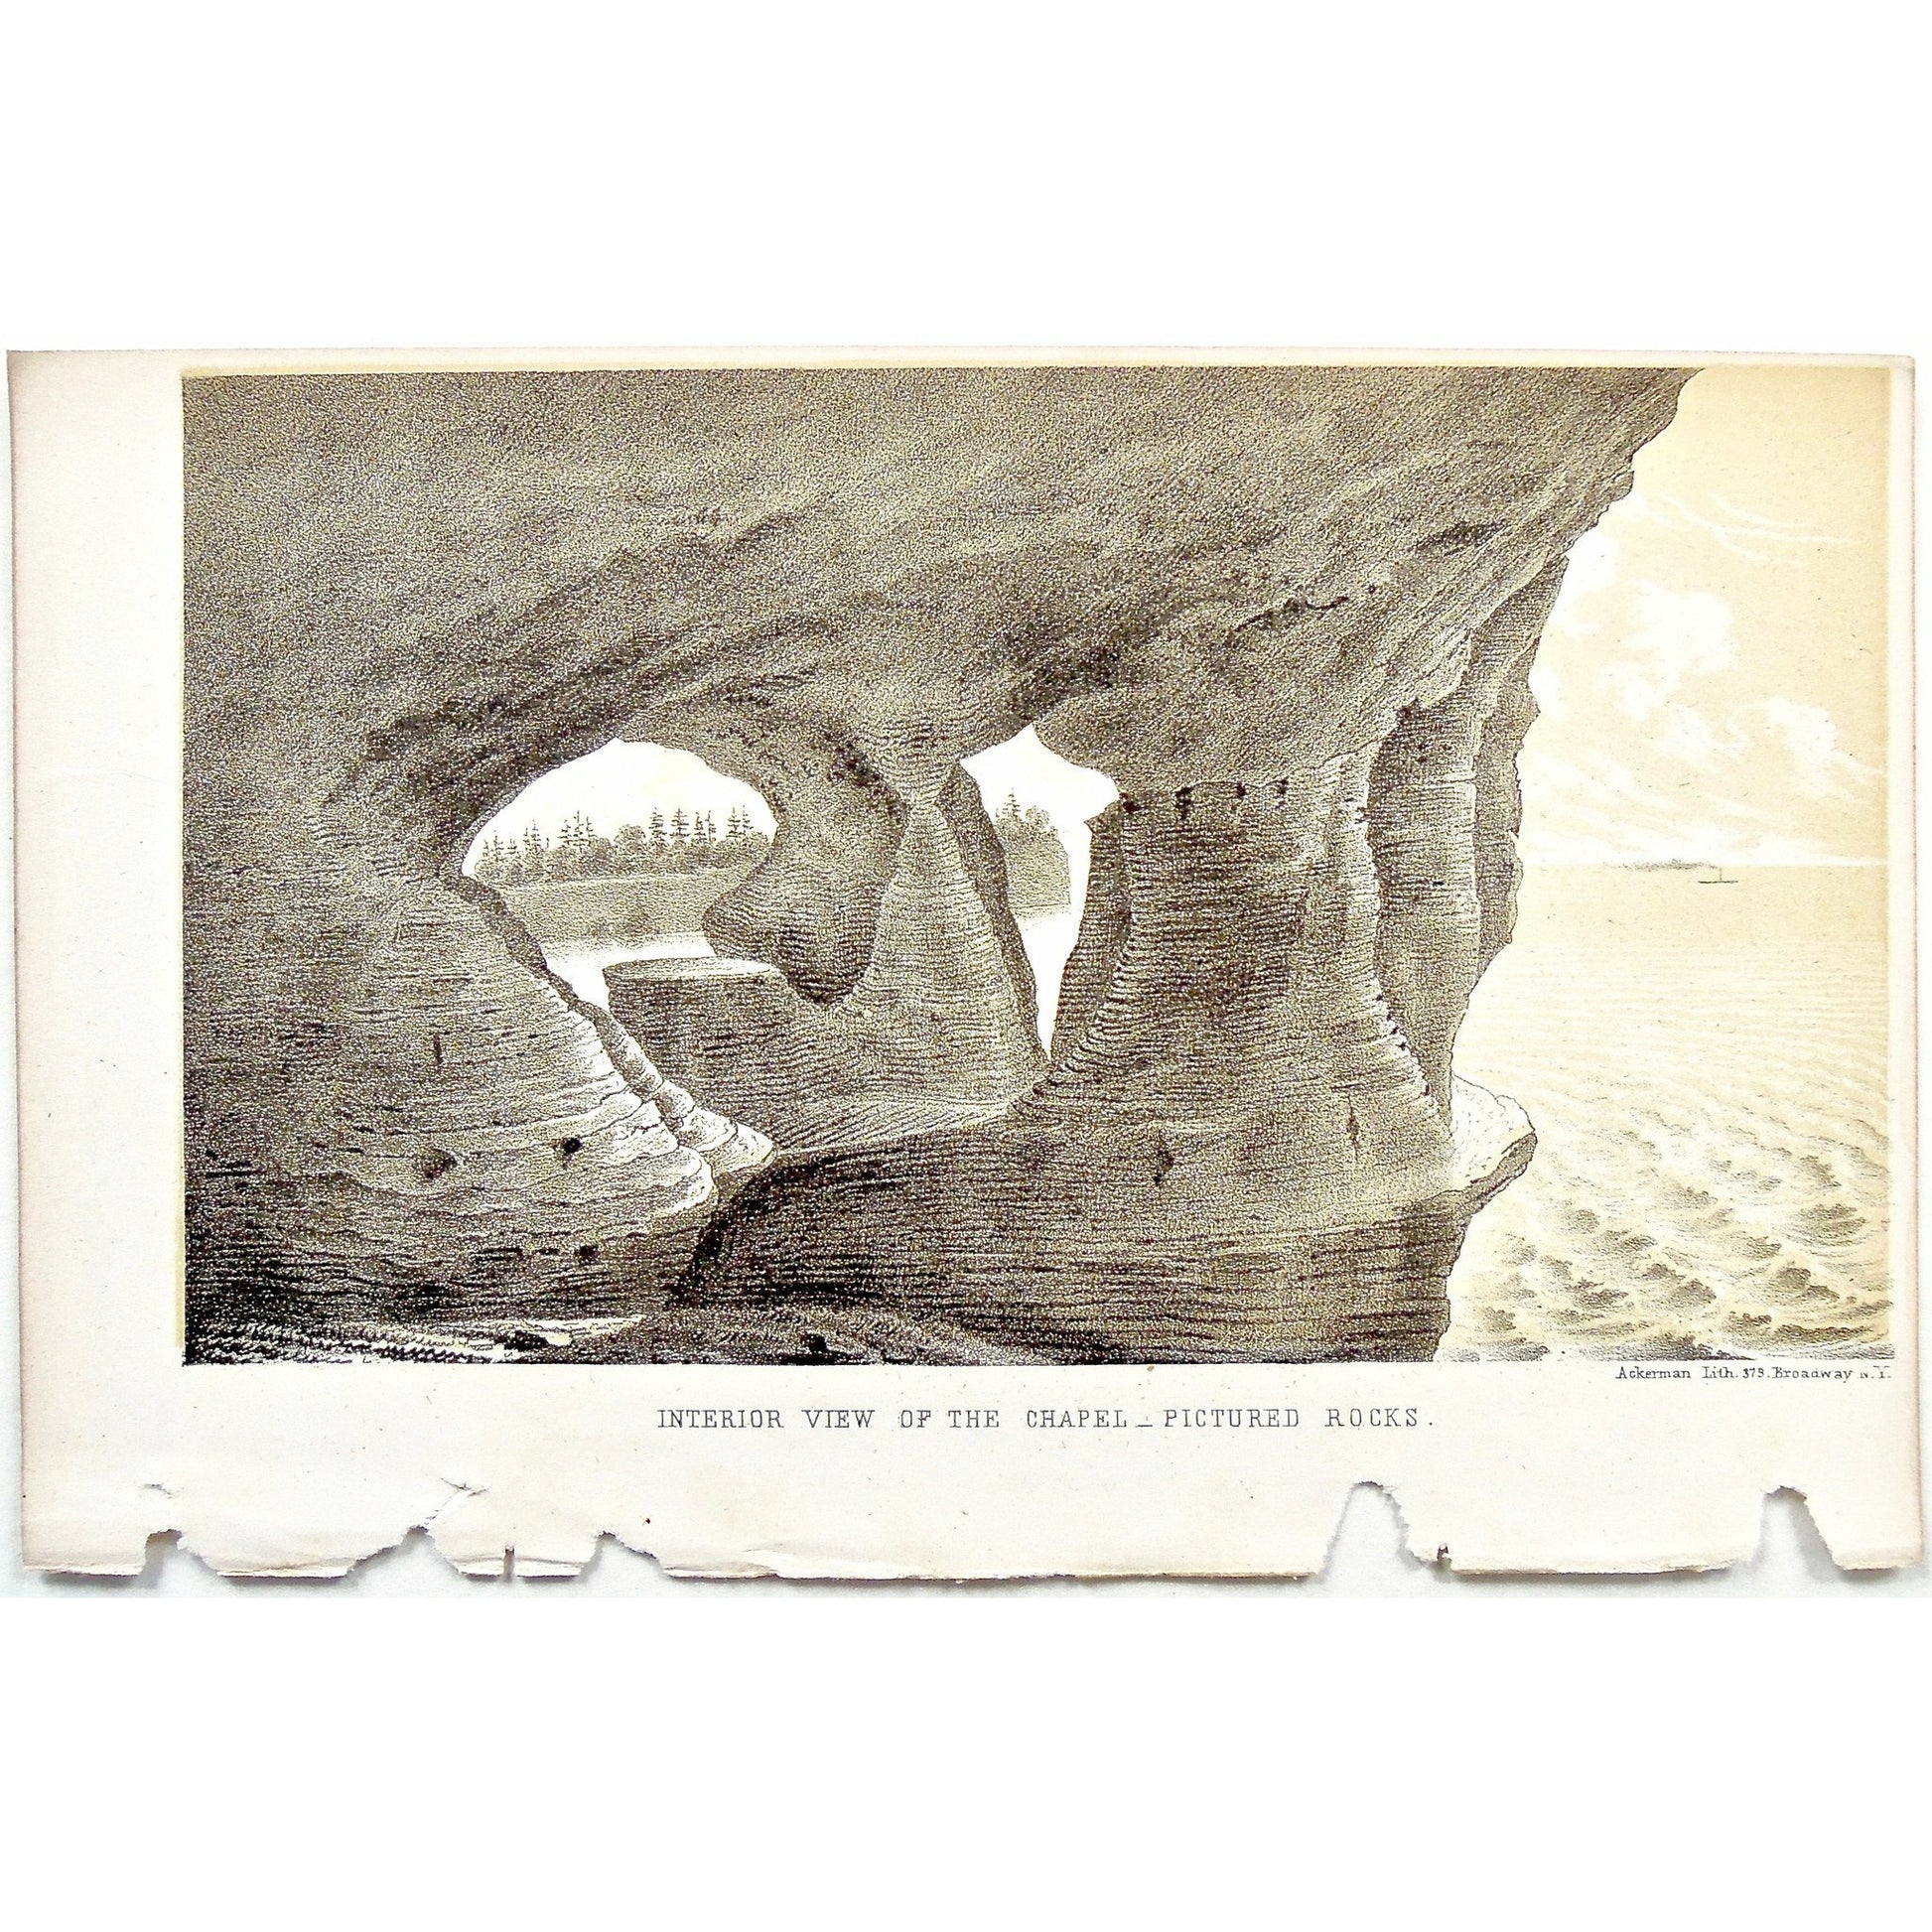 Interior View of the Chapel, Interior View, Chapel, Rocks, Rock Formations, Pictured Rocks, Cliff, View, Erosion, Landscape, Lake Superior, Lake, Superior, National Lakeshore, Lakeshore, Michigan, MI, Ackerman, 379 Broadway, Foster, Whitney, House of Representatives, House of Reps., Report, Geology, Topography, Land District, State of Michigan, Part II, The Iron Region, General Geology, Washington D.C., Washington, DC, D.C., 1851, lithograph, two-toned, Antique Print, Antique, Prints, Vintage, Art, Wall art